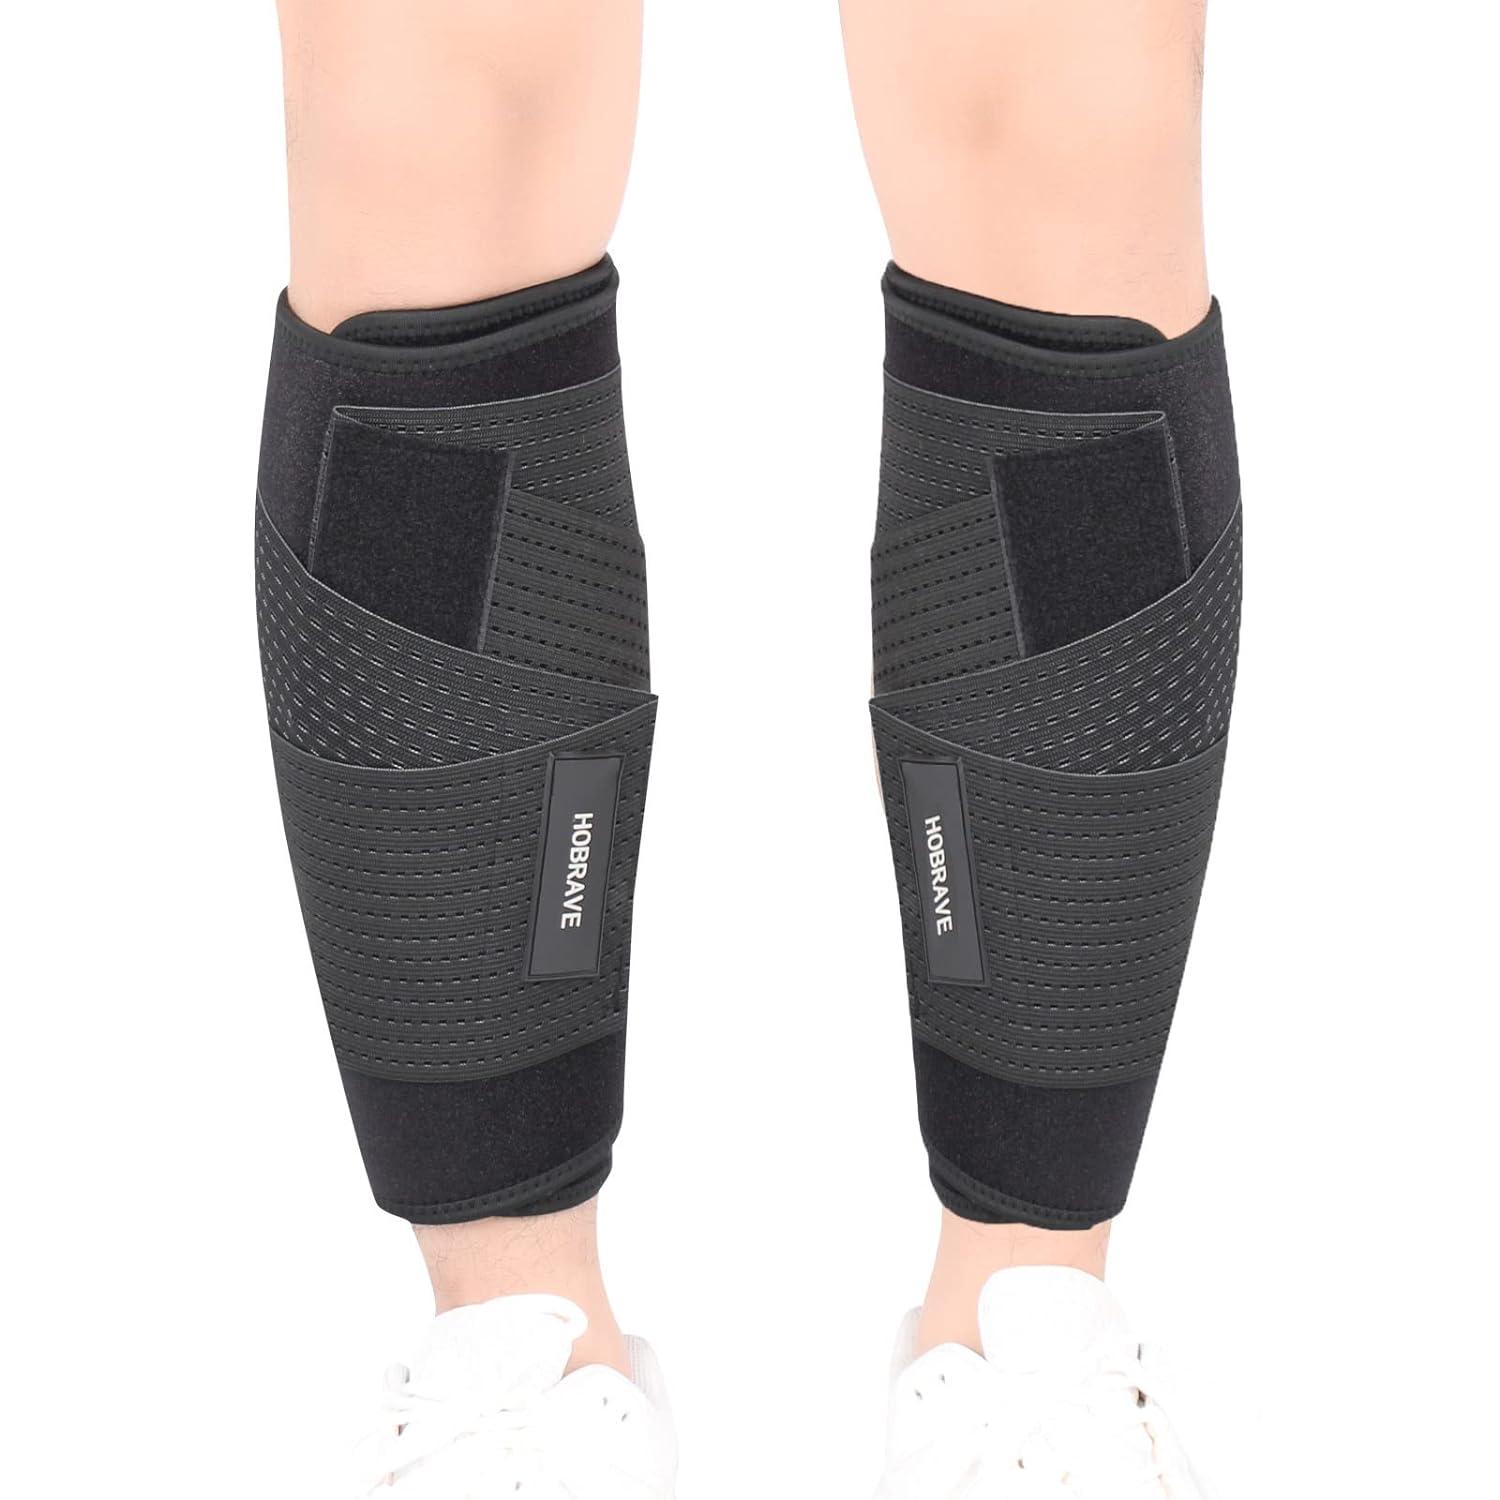 Calf Brace Shin 2 Pack Splint Compression Wrap Sleeve for Torn Calf Muscle  Pain Relief Strain Sprain Injury Adjustable Leg Support Men and Women